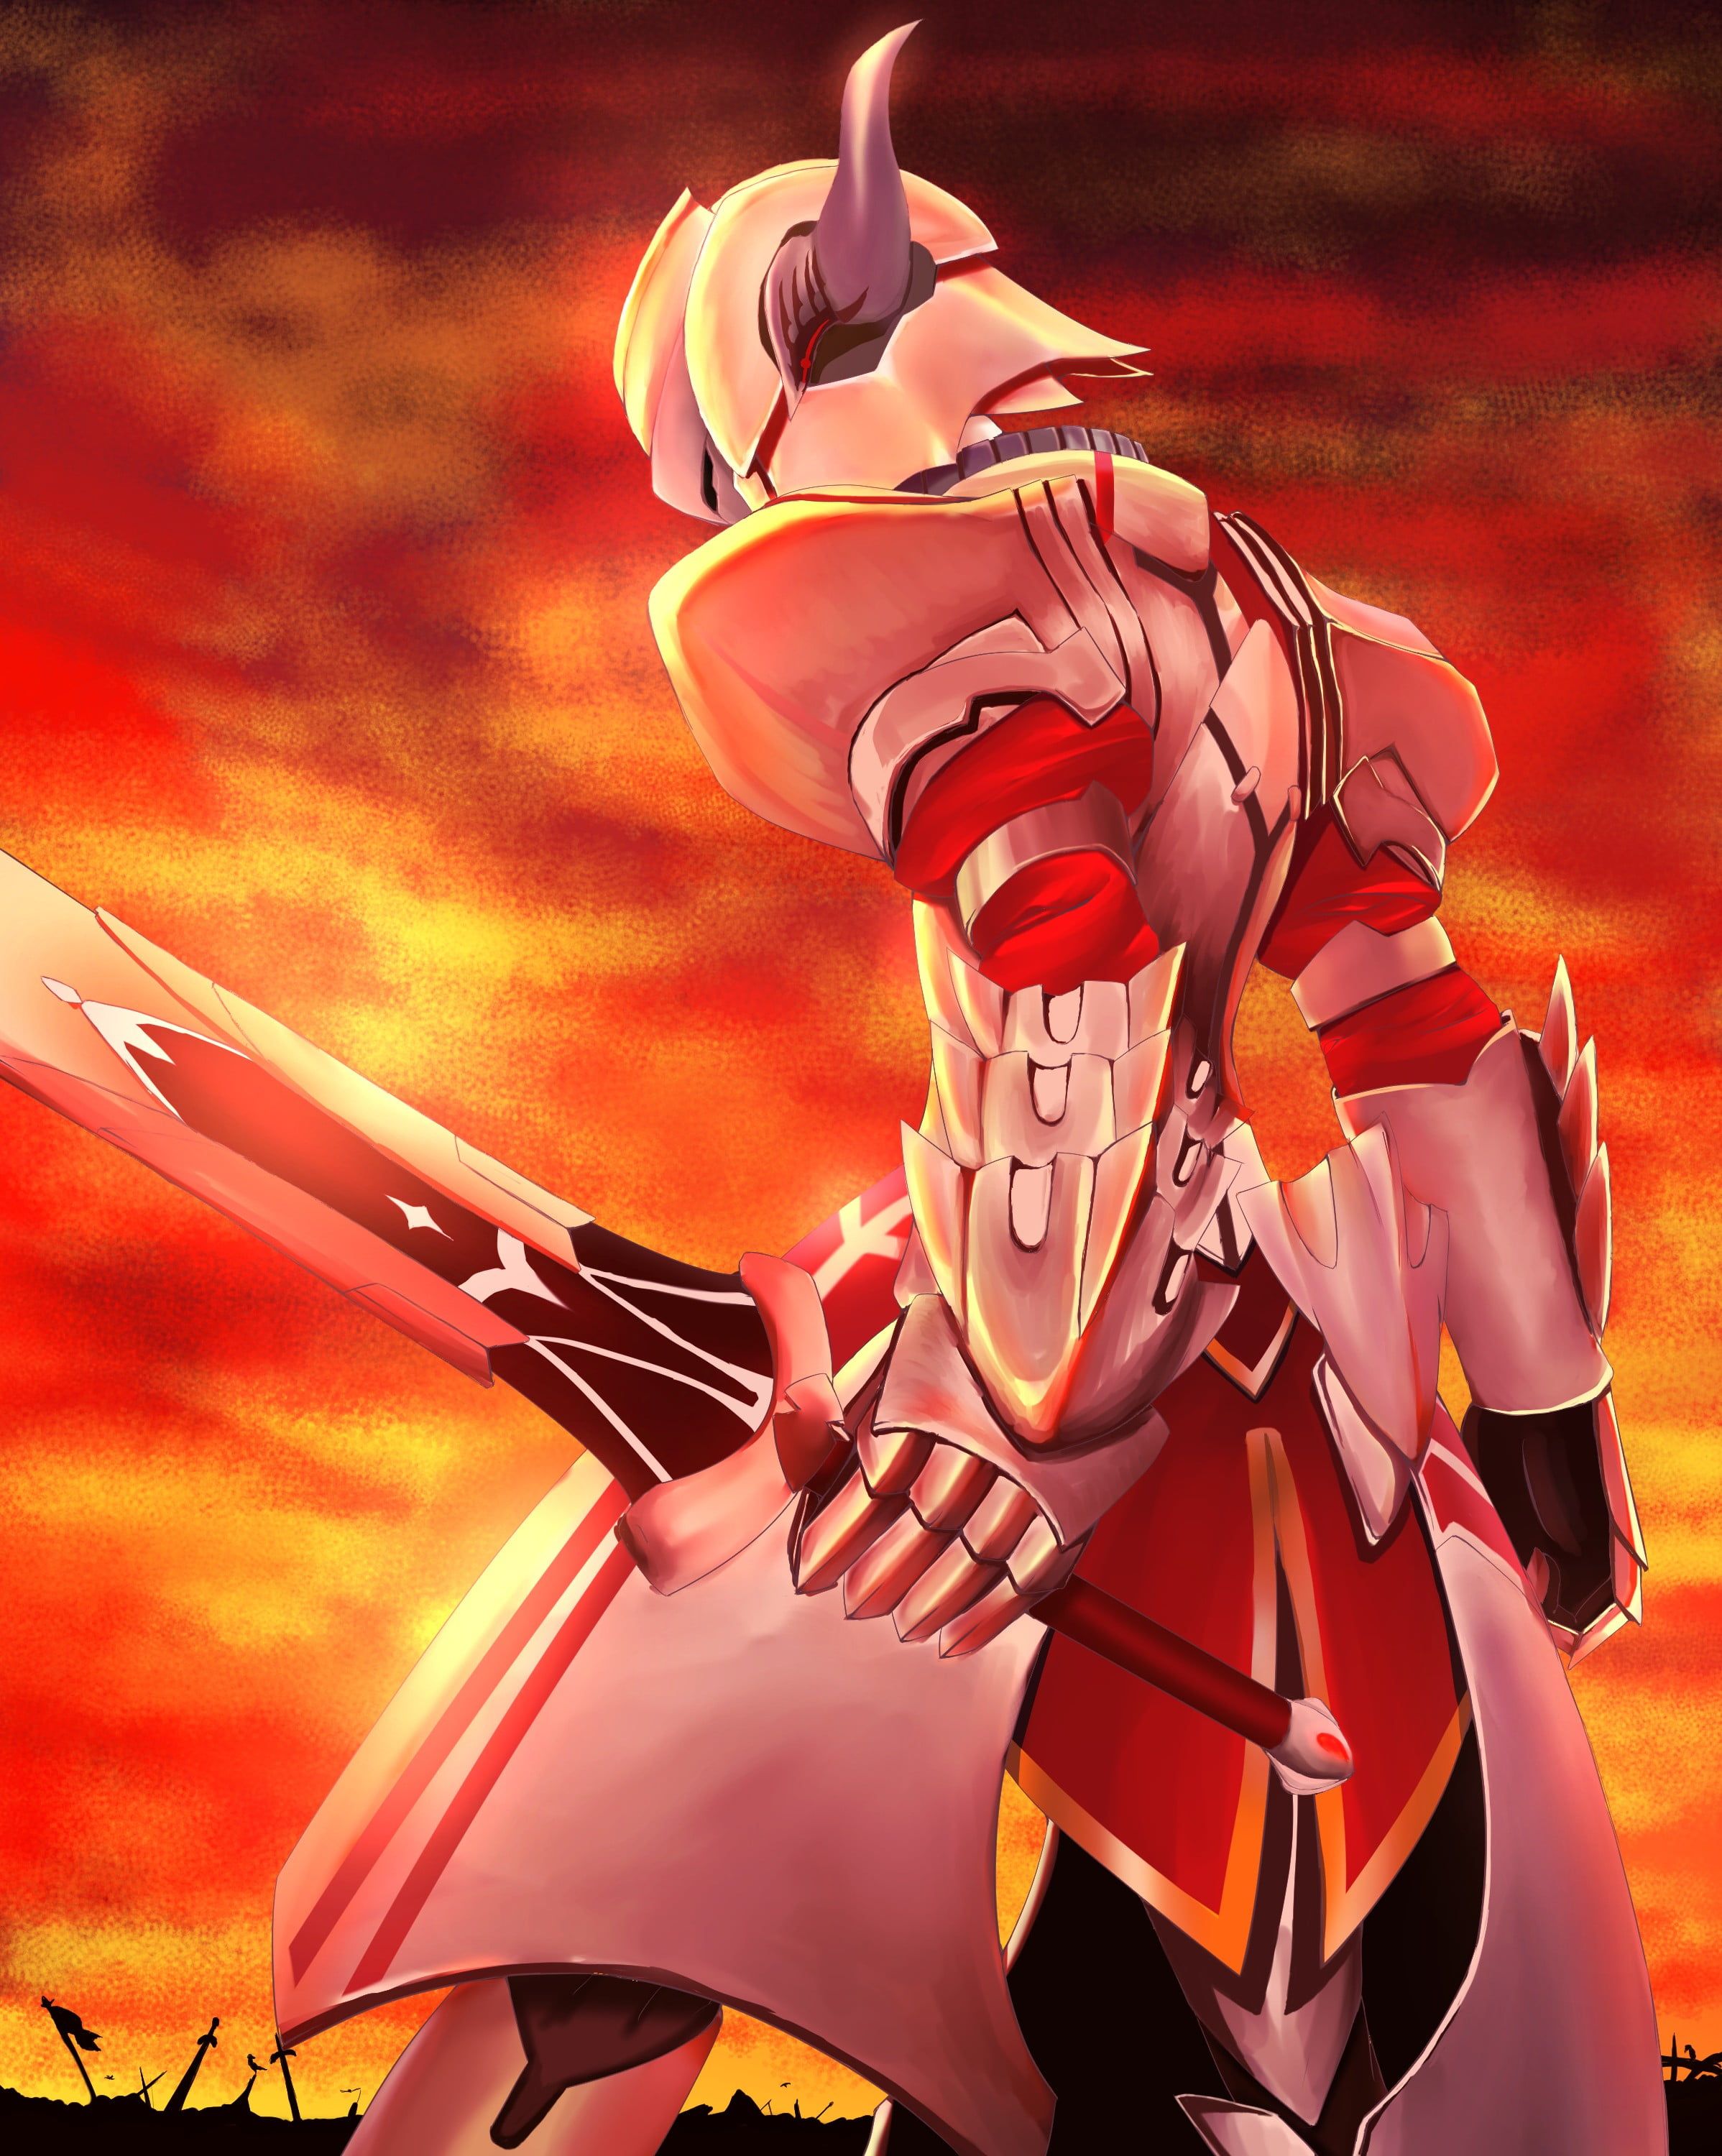 Armored person holding sword illustration, anime, armor, knight